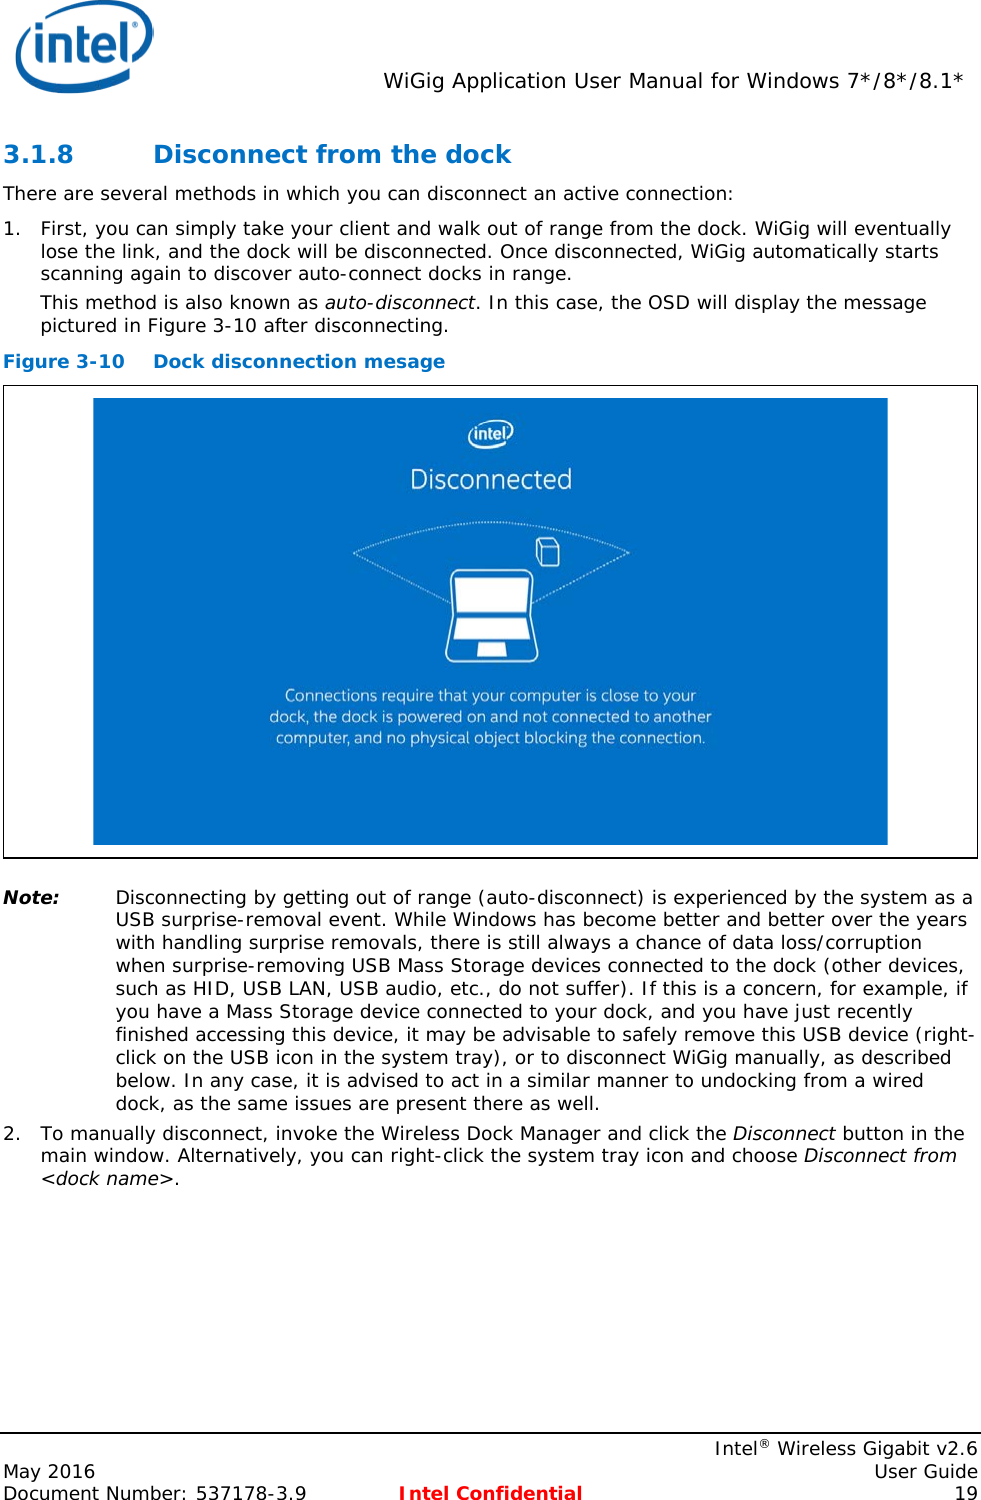  WiGig Application User Manual for Windows 7*/8*/8.1*    Intel® Wireless Gigabit v2.6 May 2016    User Guide Document Number: 537178-3.9 Intel Confidential 19 3.1.8 Disconnect from the dock There are several methods in which you can disconnect an active connection: 1. First, you can simply take your client and walk out of range from the dock. WiGig will eventually lose the link, and the dock will be disconnected. Once disconnected, WiGig automatically starts scanning again to discover auto-connect docks in range. This method is also known as auto-disconnect. In this case, the OSD will display the message pictured in Figure 3-10 after disconnecting. Figure 3-10 Dock disconnection mesage  Note: Disconnecting by getting out of range (auto-disconnect) is experienced by the system as a USB surprise-removal event. While Windows has become better and better over the years with handling surprise removals, there is still always a chance of data loss/corruption when surprise-removing USB Mass Storage devices connected to the dock (other devices, such as HID, USB LAN, USB audio, etc., do not suffer). If this is a concern, for example, if you have a Mass Storage device connected to your dock, and you have just recently finished accessing this device, it may be advisable to safely remove this USB device (right-click on the USB icon in the system tray), or to disconnect WiGig manually, as described below. In any case, it is advised to act in a similar manner to undocking from a wired dock, as the same issues are present there as well. 2. To manually disconnect, invoke the Wireless Dock Manager and click the Disconnect button in the main window. Alternatively, you can right-click the system tray icon and choose Disconnect from &lt;dock name&gt;. 